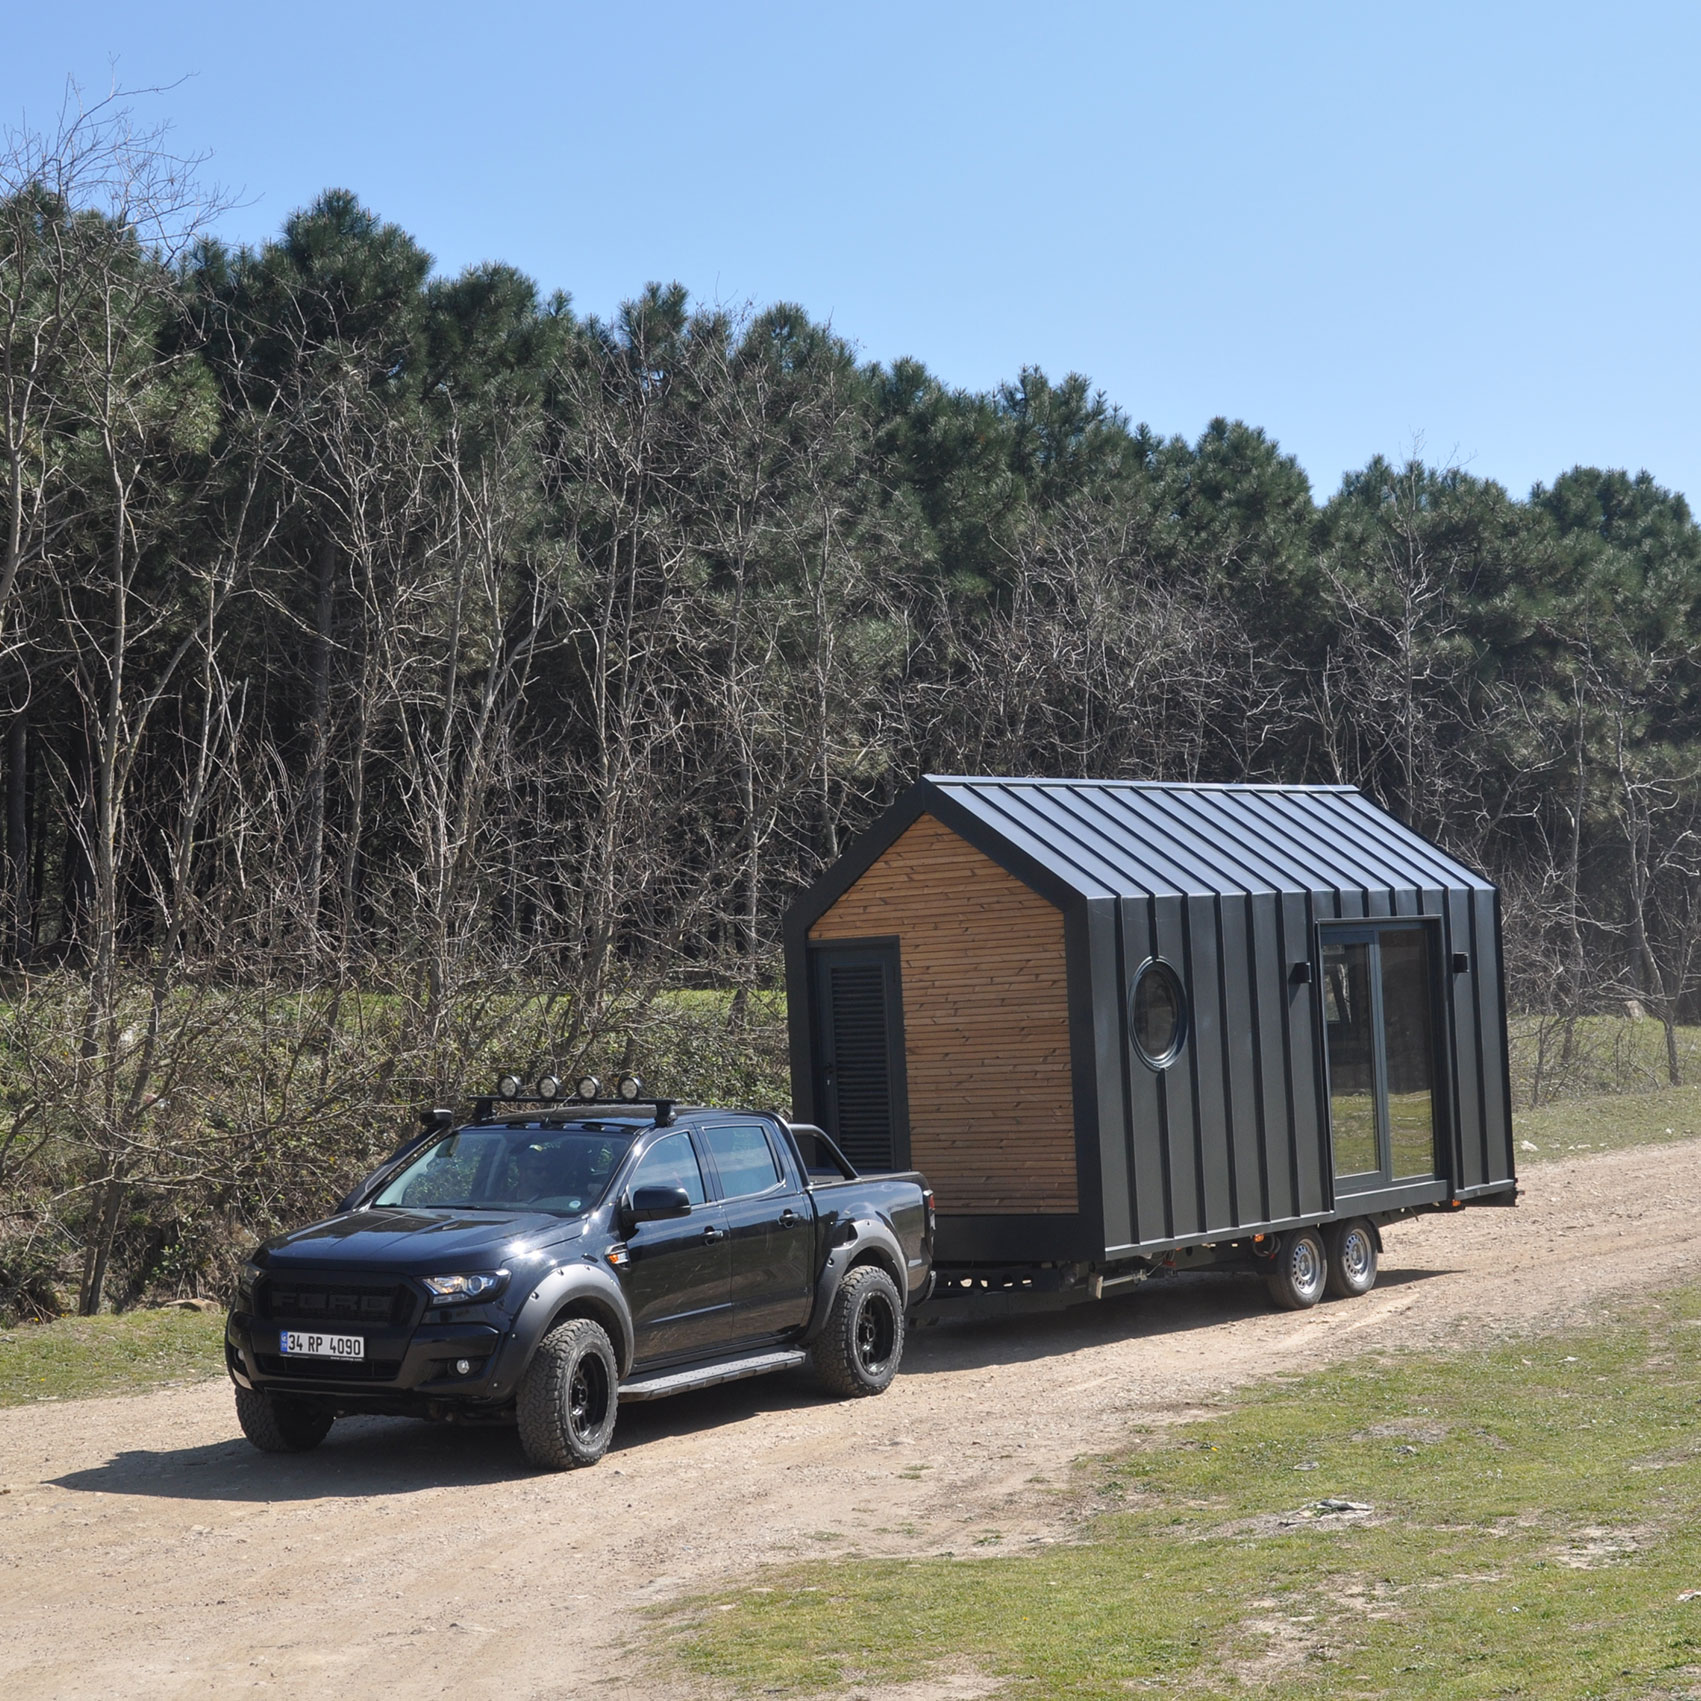 Start your inspiring journey with Mooble House Tiny House, now.